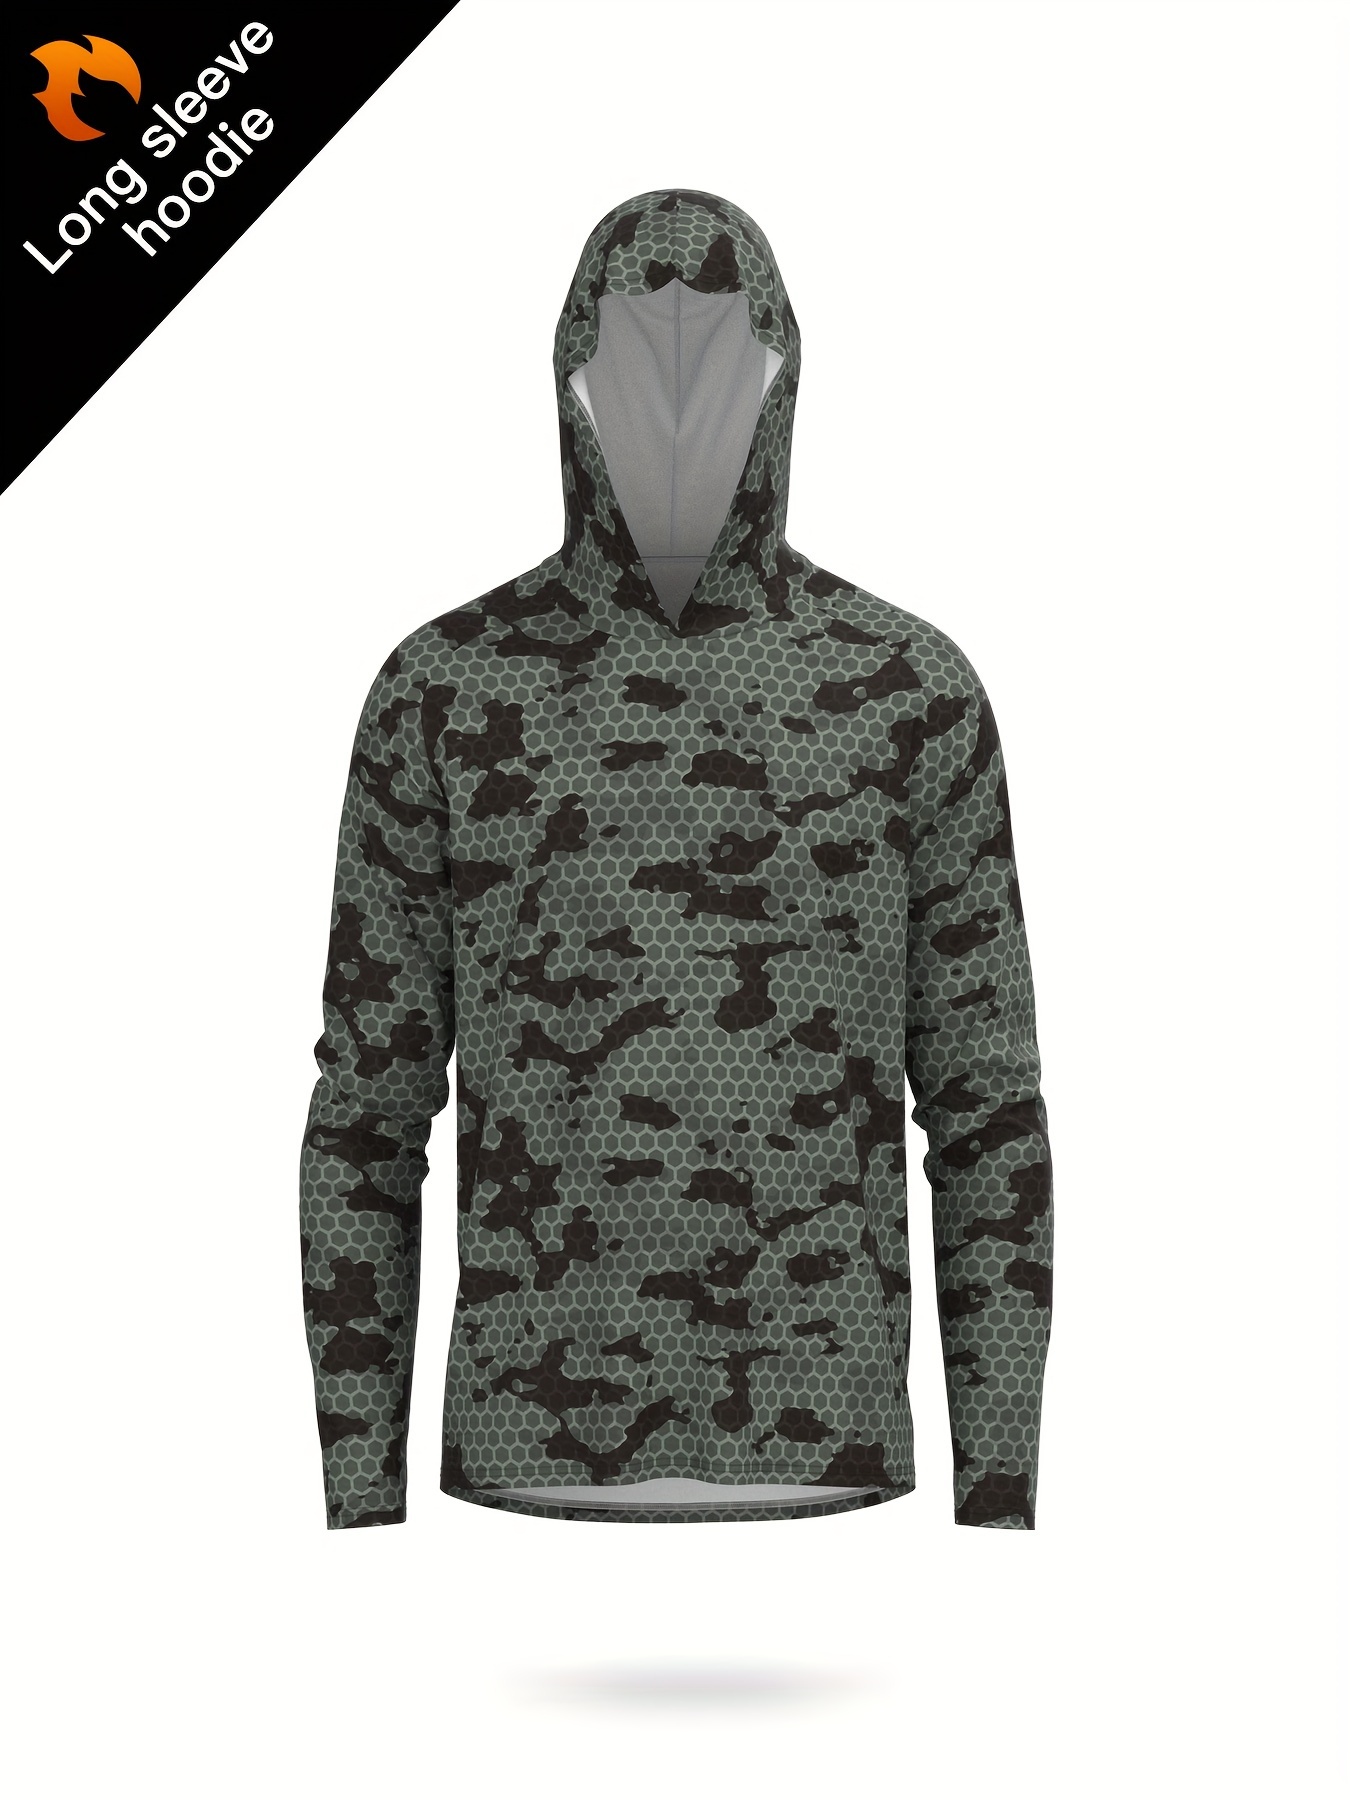 Men's Camouflage Print UPF 50+ Sun Protection Hooded Top, Long Sleeve High Stretch Rash Guard For Fishing Hiking Outdoor